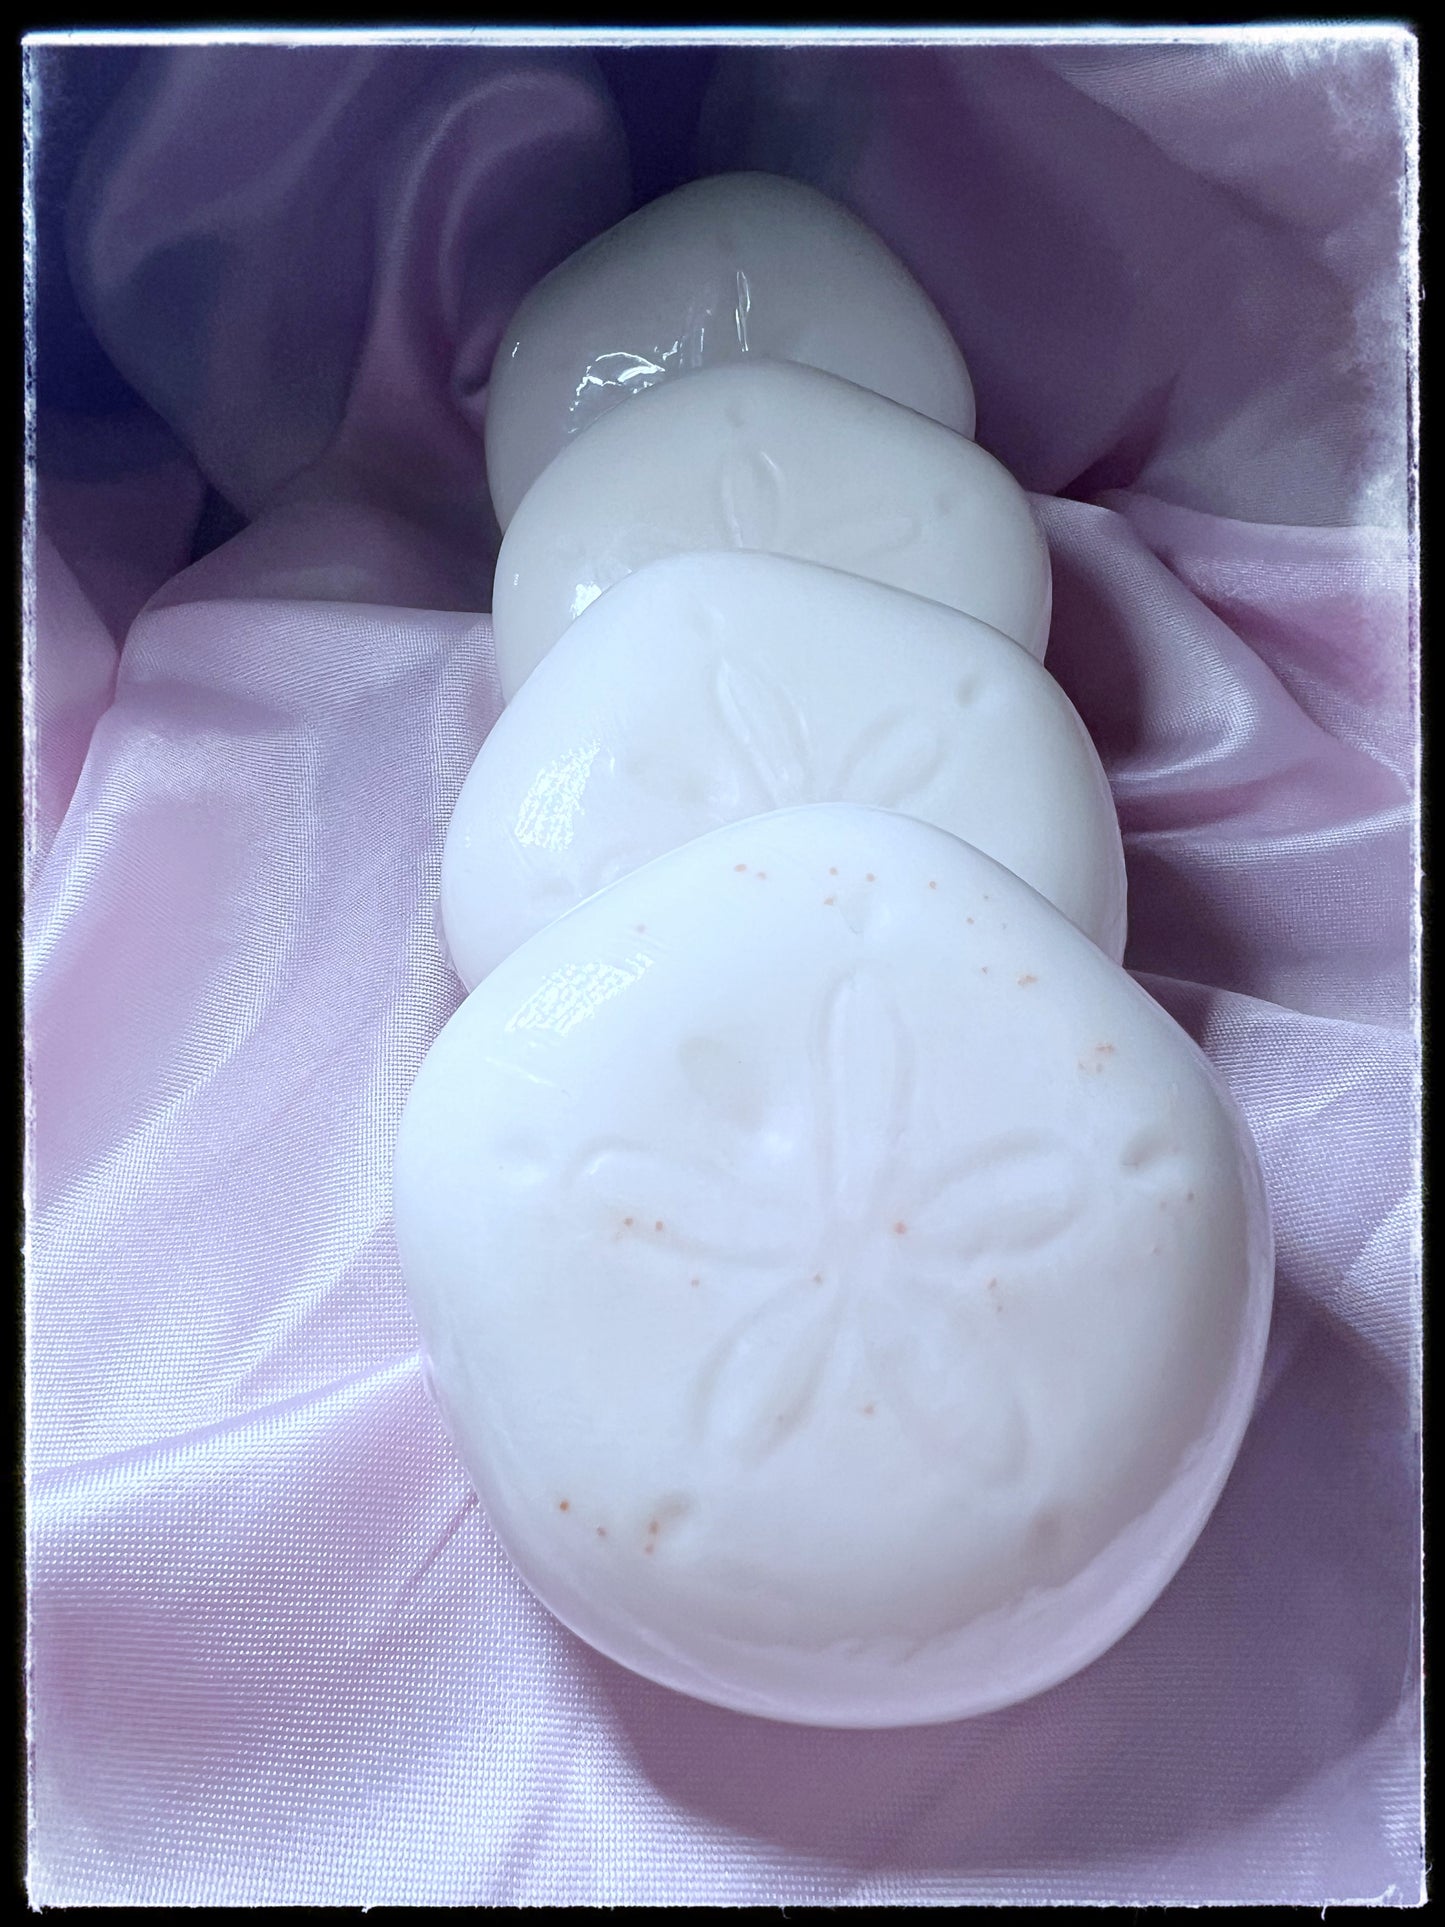 White Sands Soap with Pink Vit E Beads